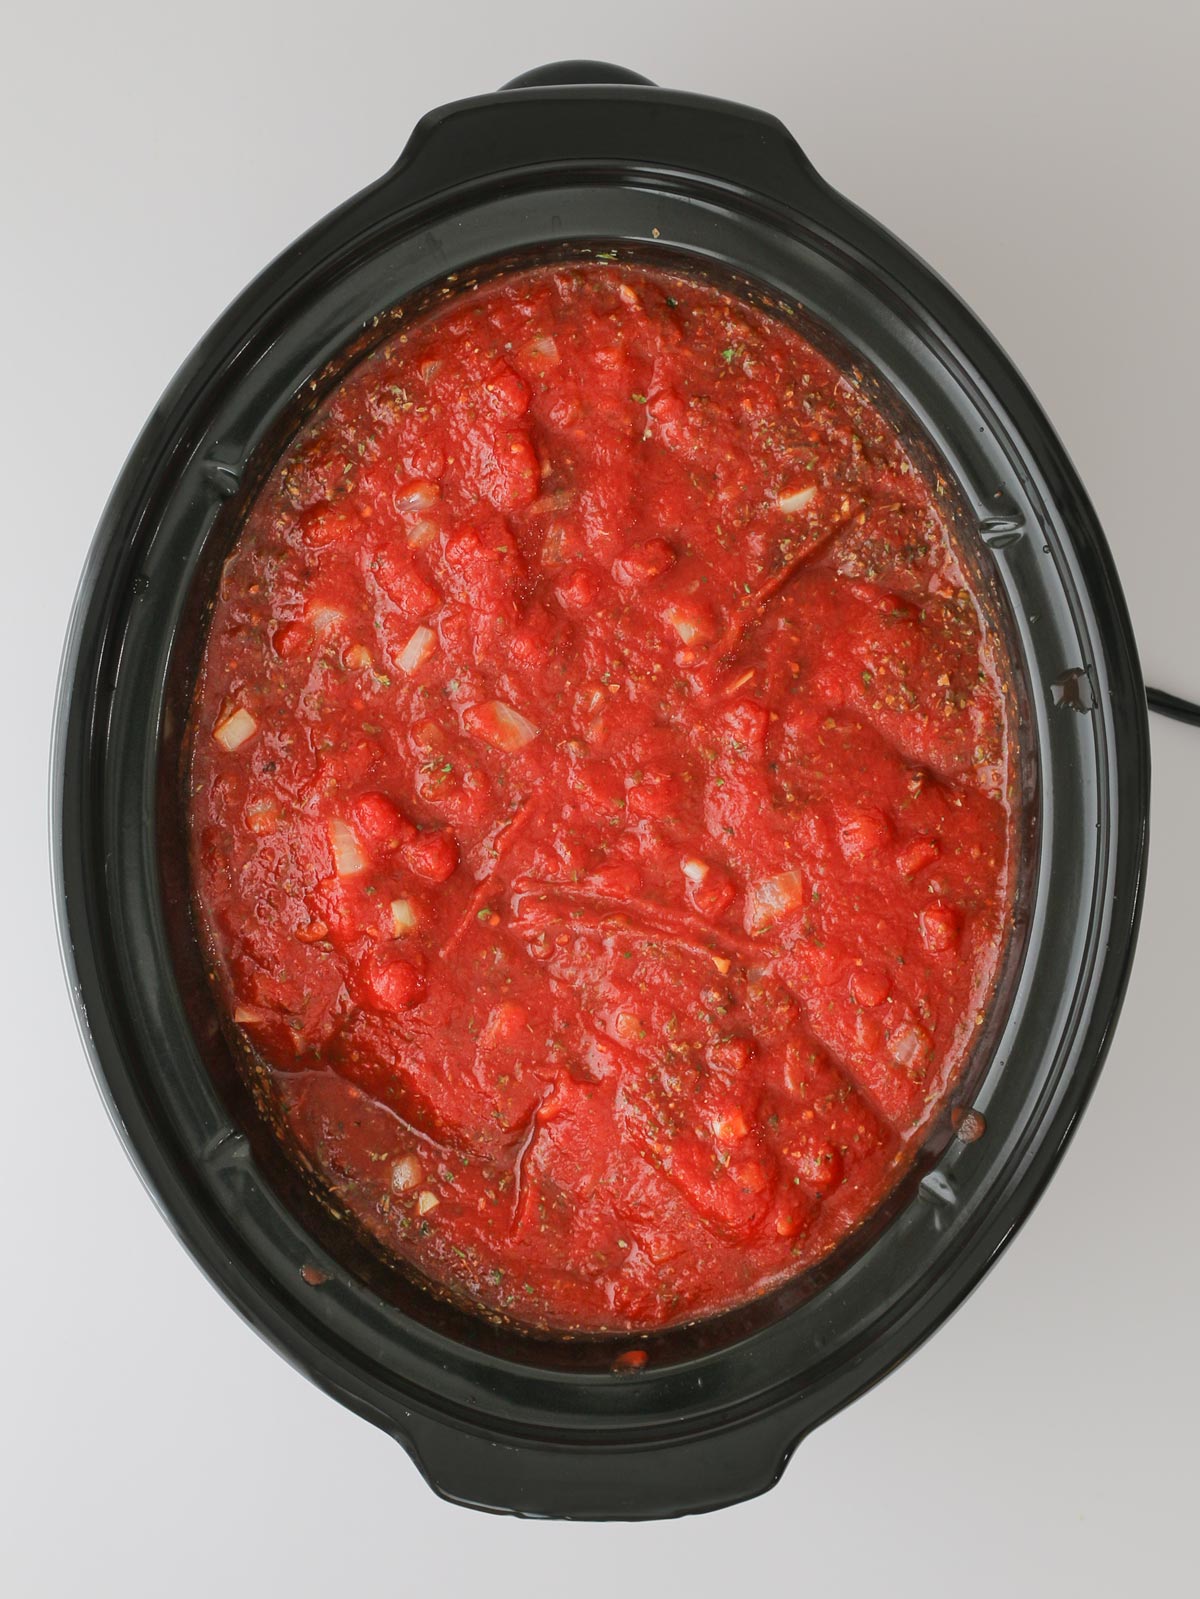 the sauce ready to simmer in the crockpot.